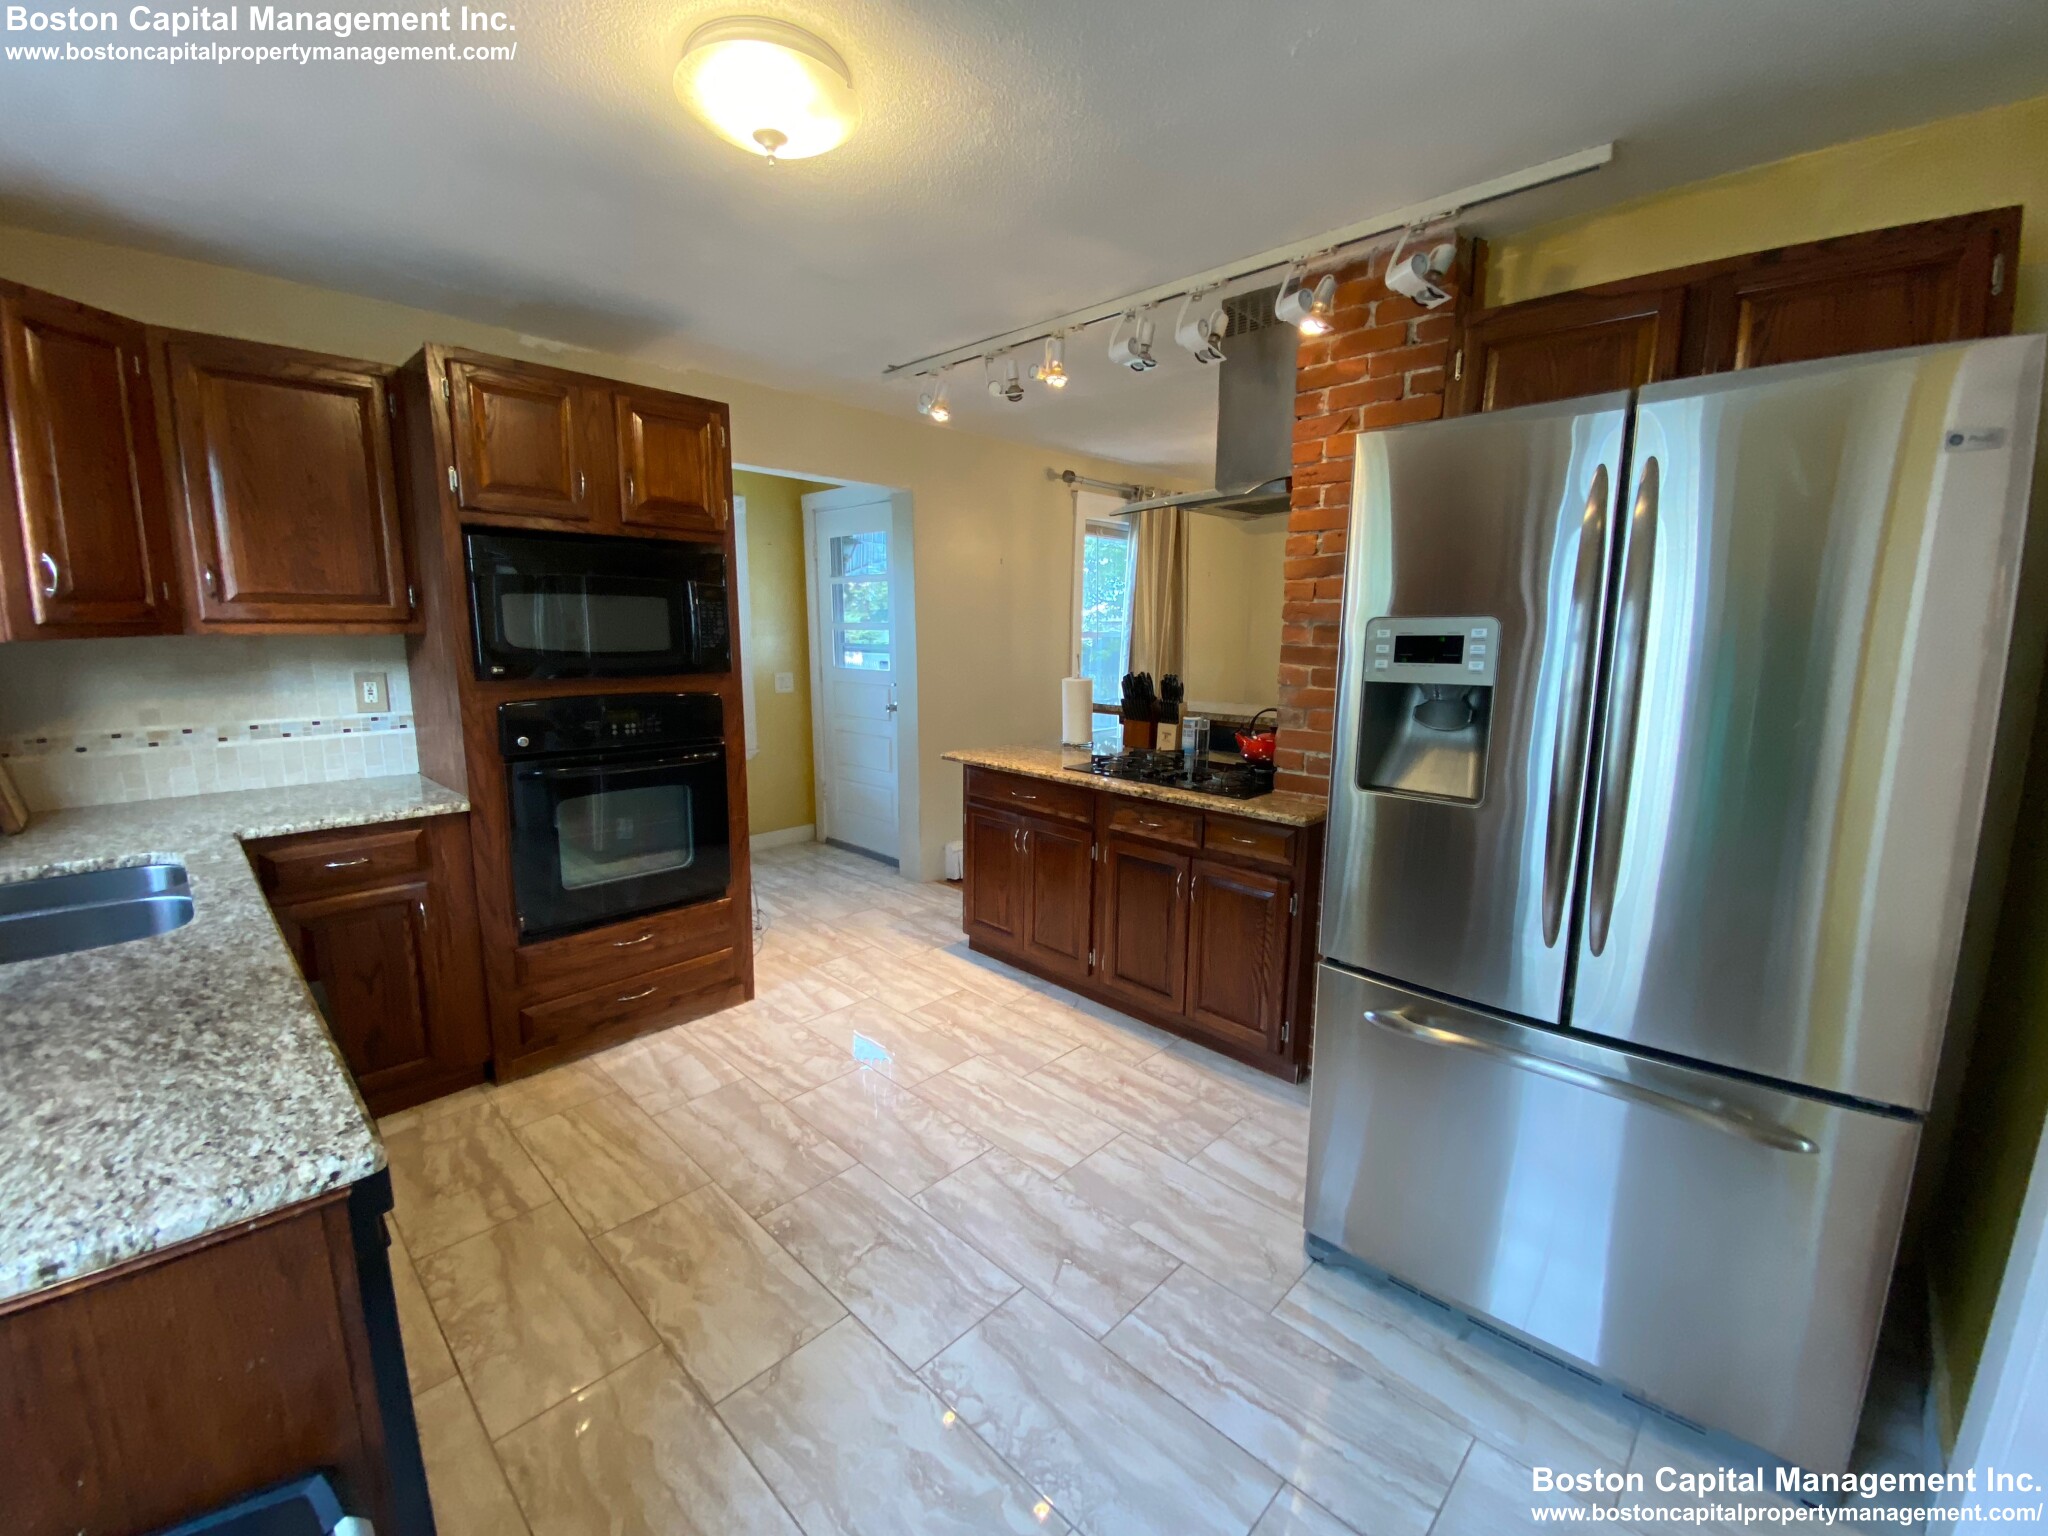 Photos of apartment on Bellvale St.,Malden MA 02148